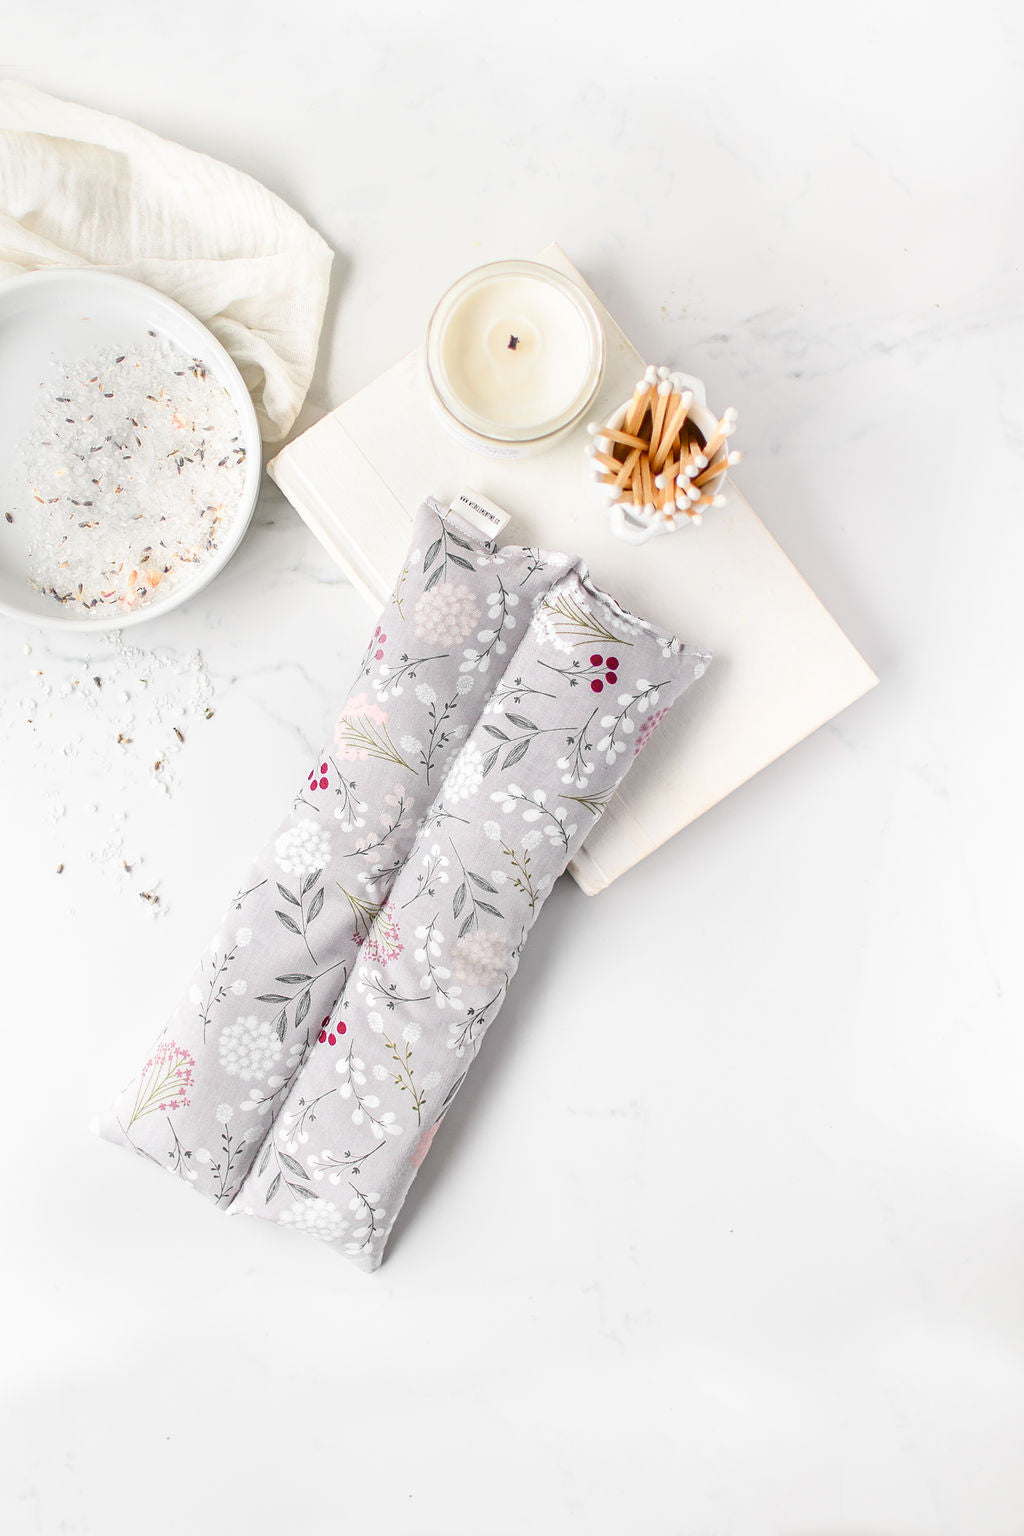 Hot + Cold Therapy Pack - Grey Floral